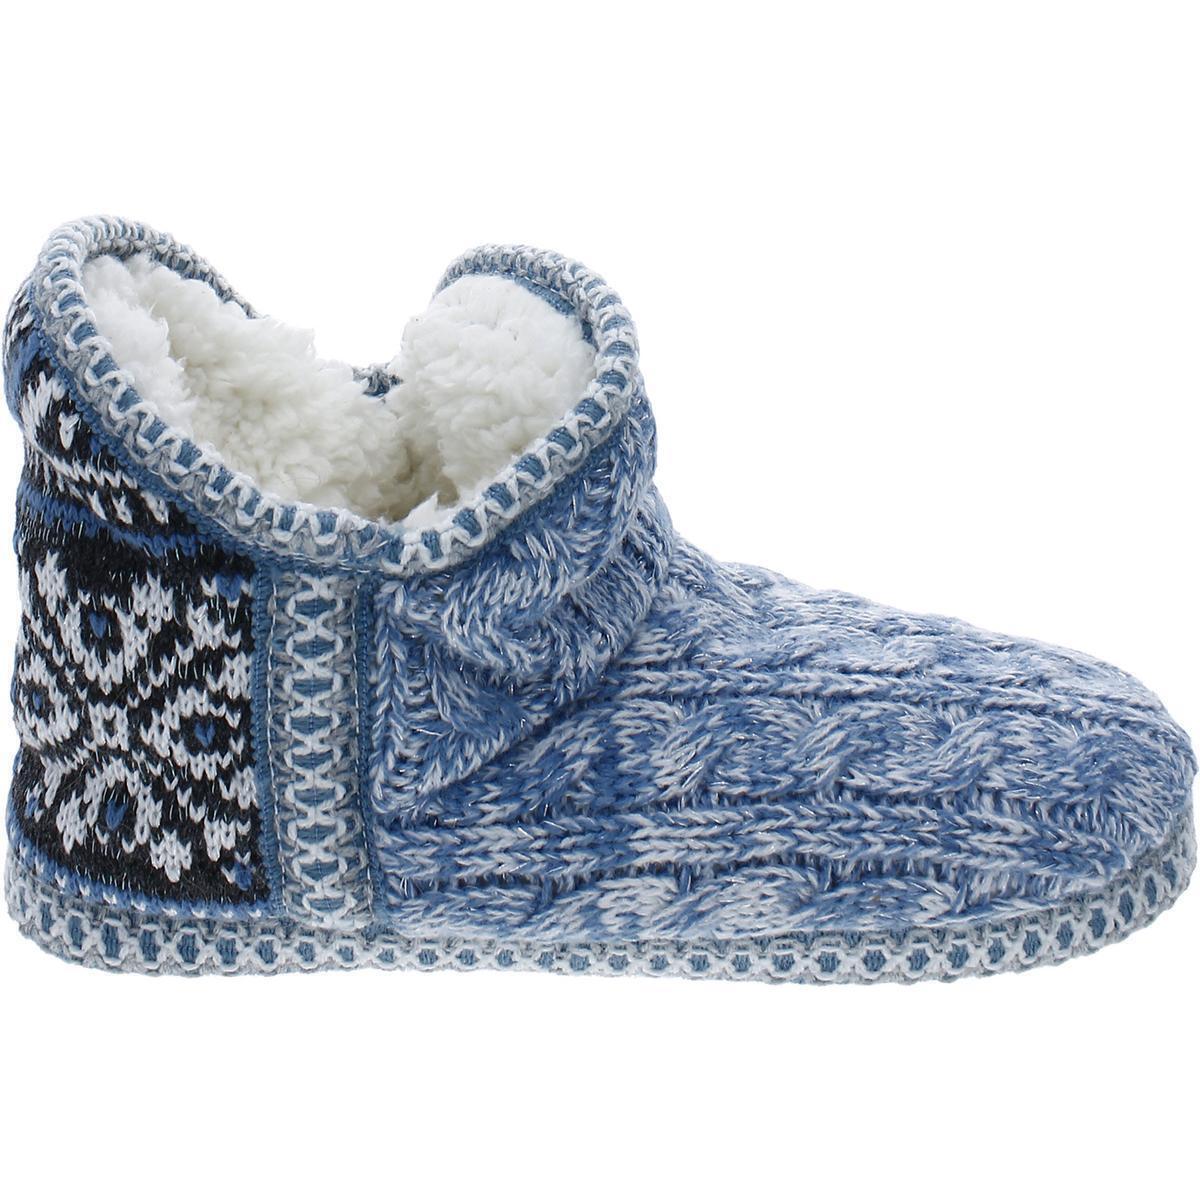 Muk Luks Womens Ankle Faux Fur Bootie Slippers alternate image